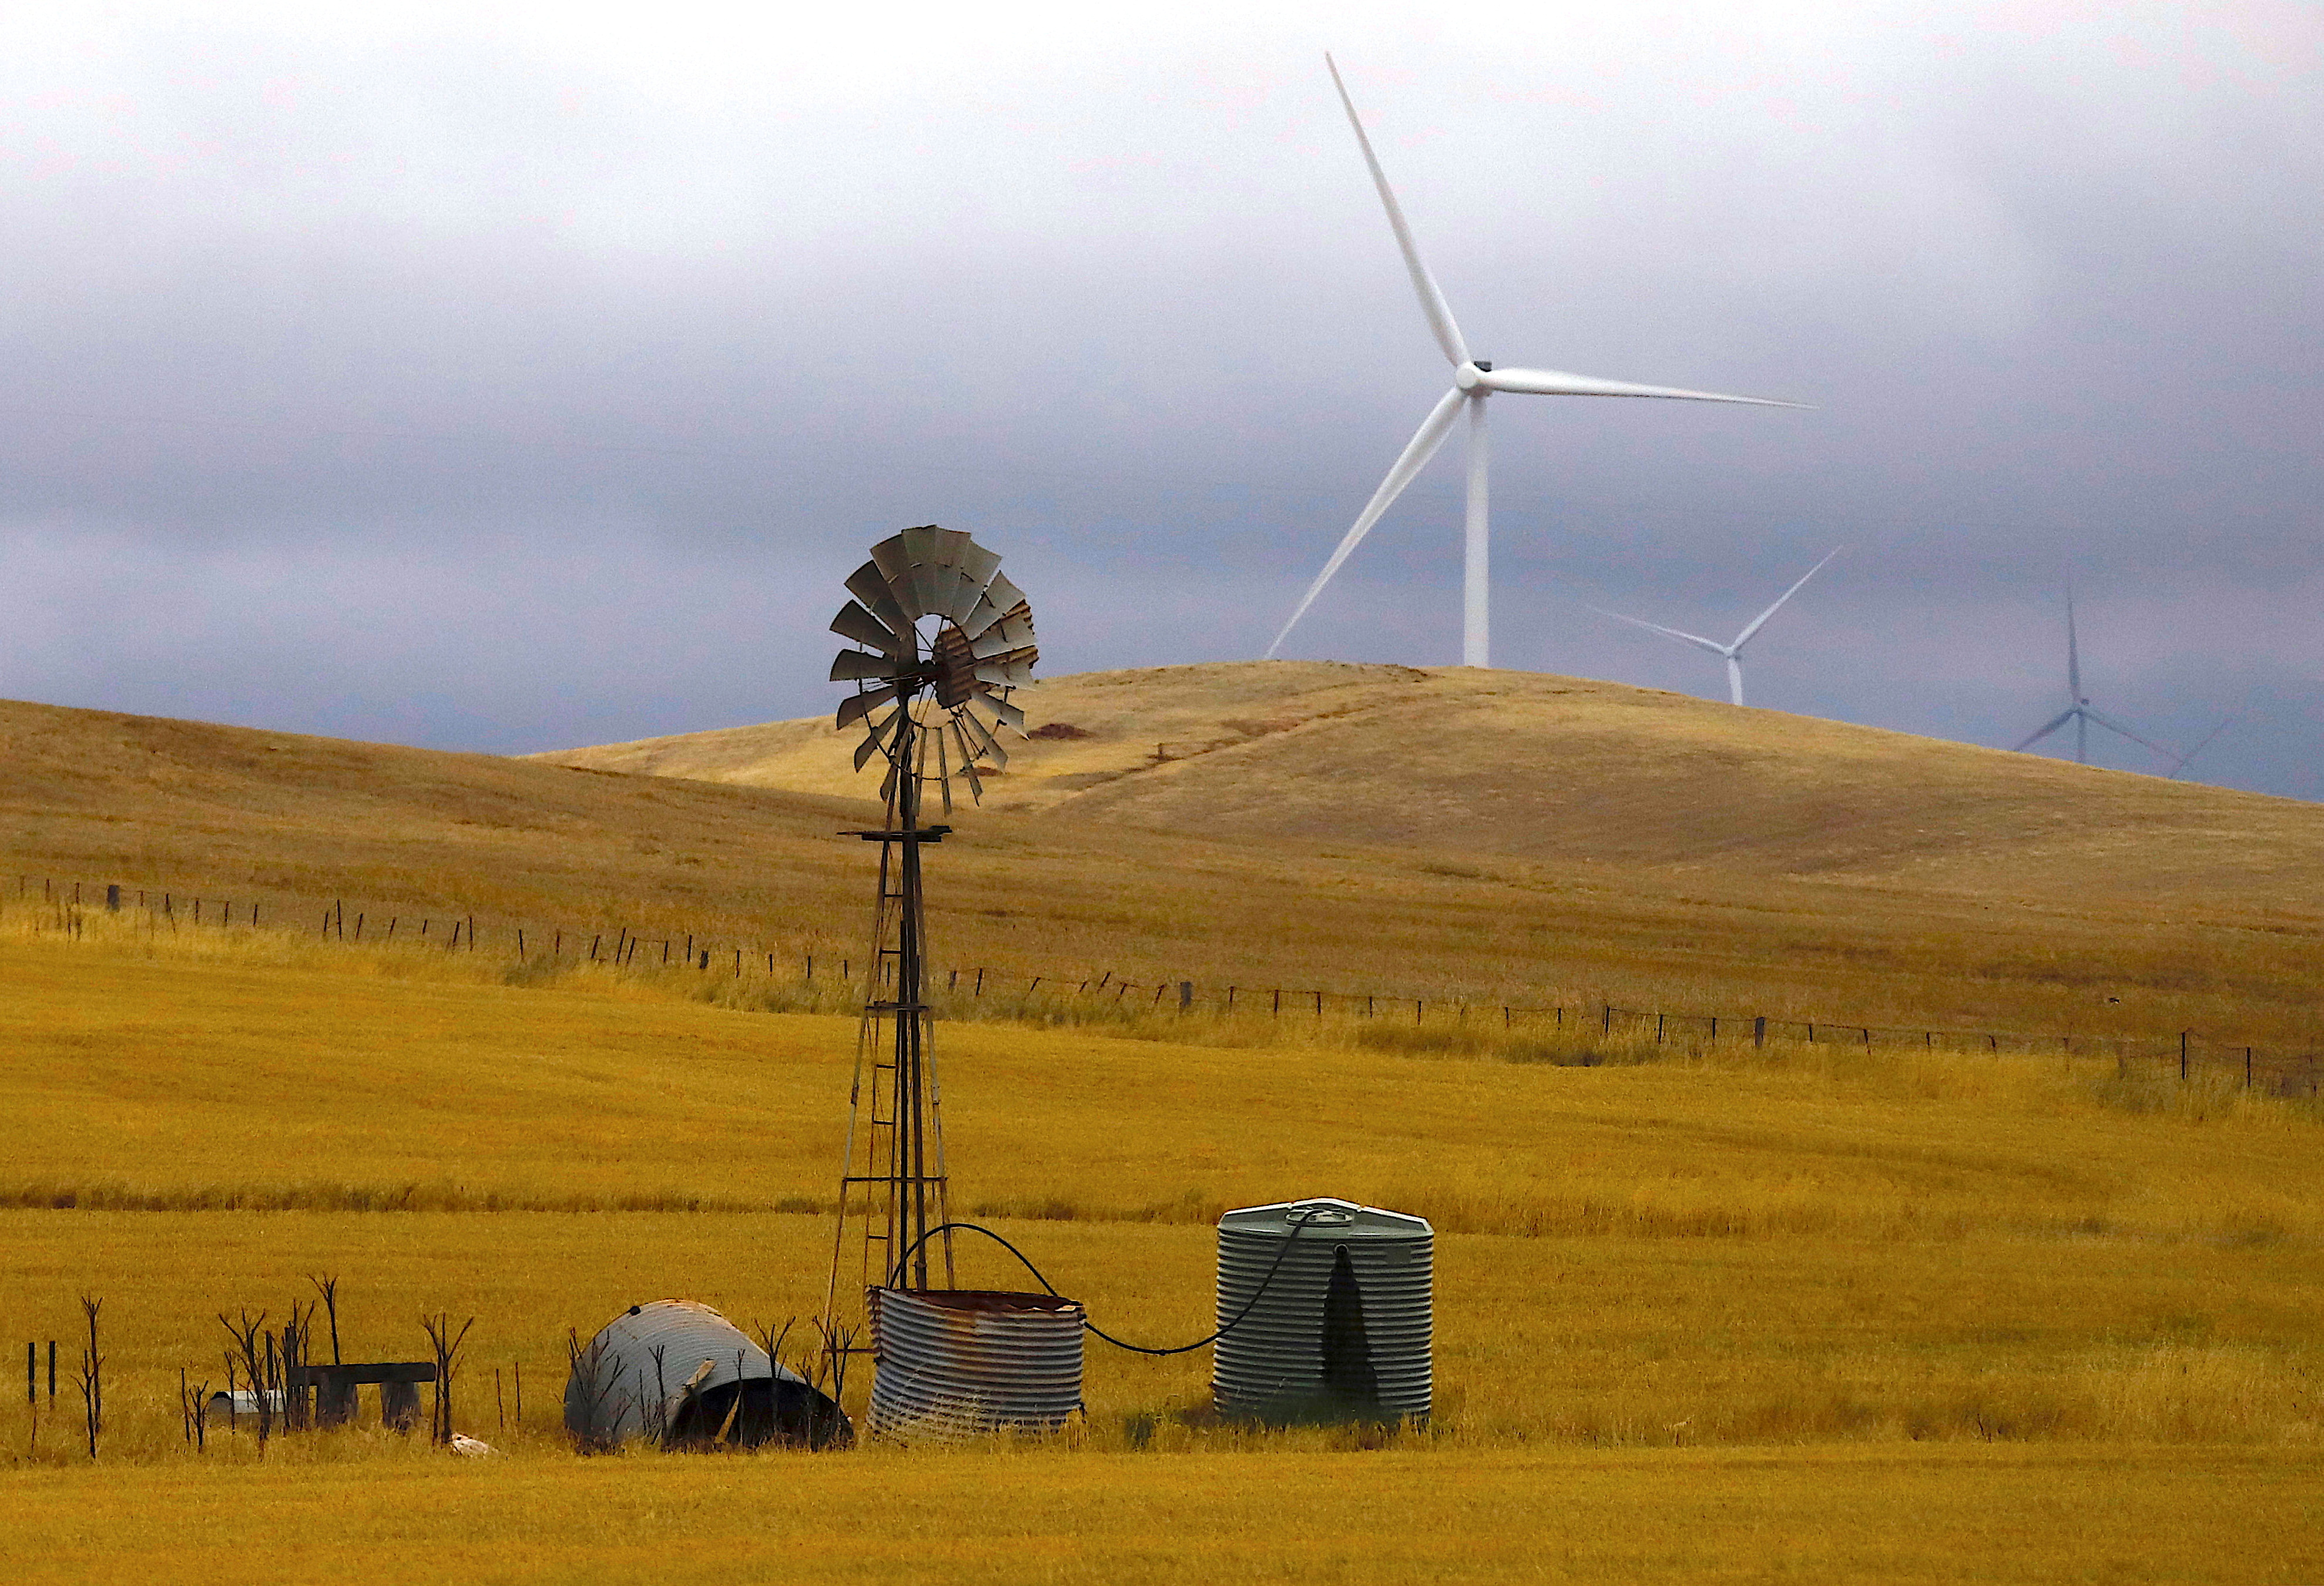 An old windmill stands in front of wind turbines in a paddock near the Hornsdale Power Reserve, featuring the world's largest lithium ion battery made by Tesla, located on the outskirts of the South Australian town of Jamestown